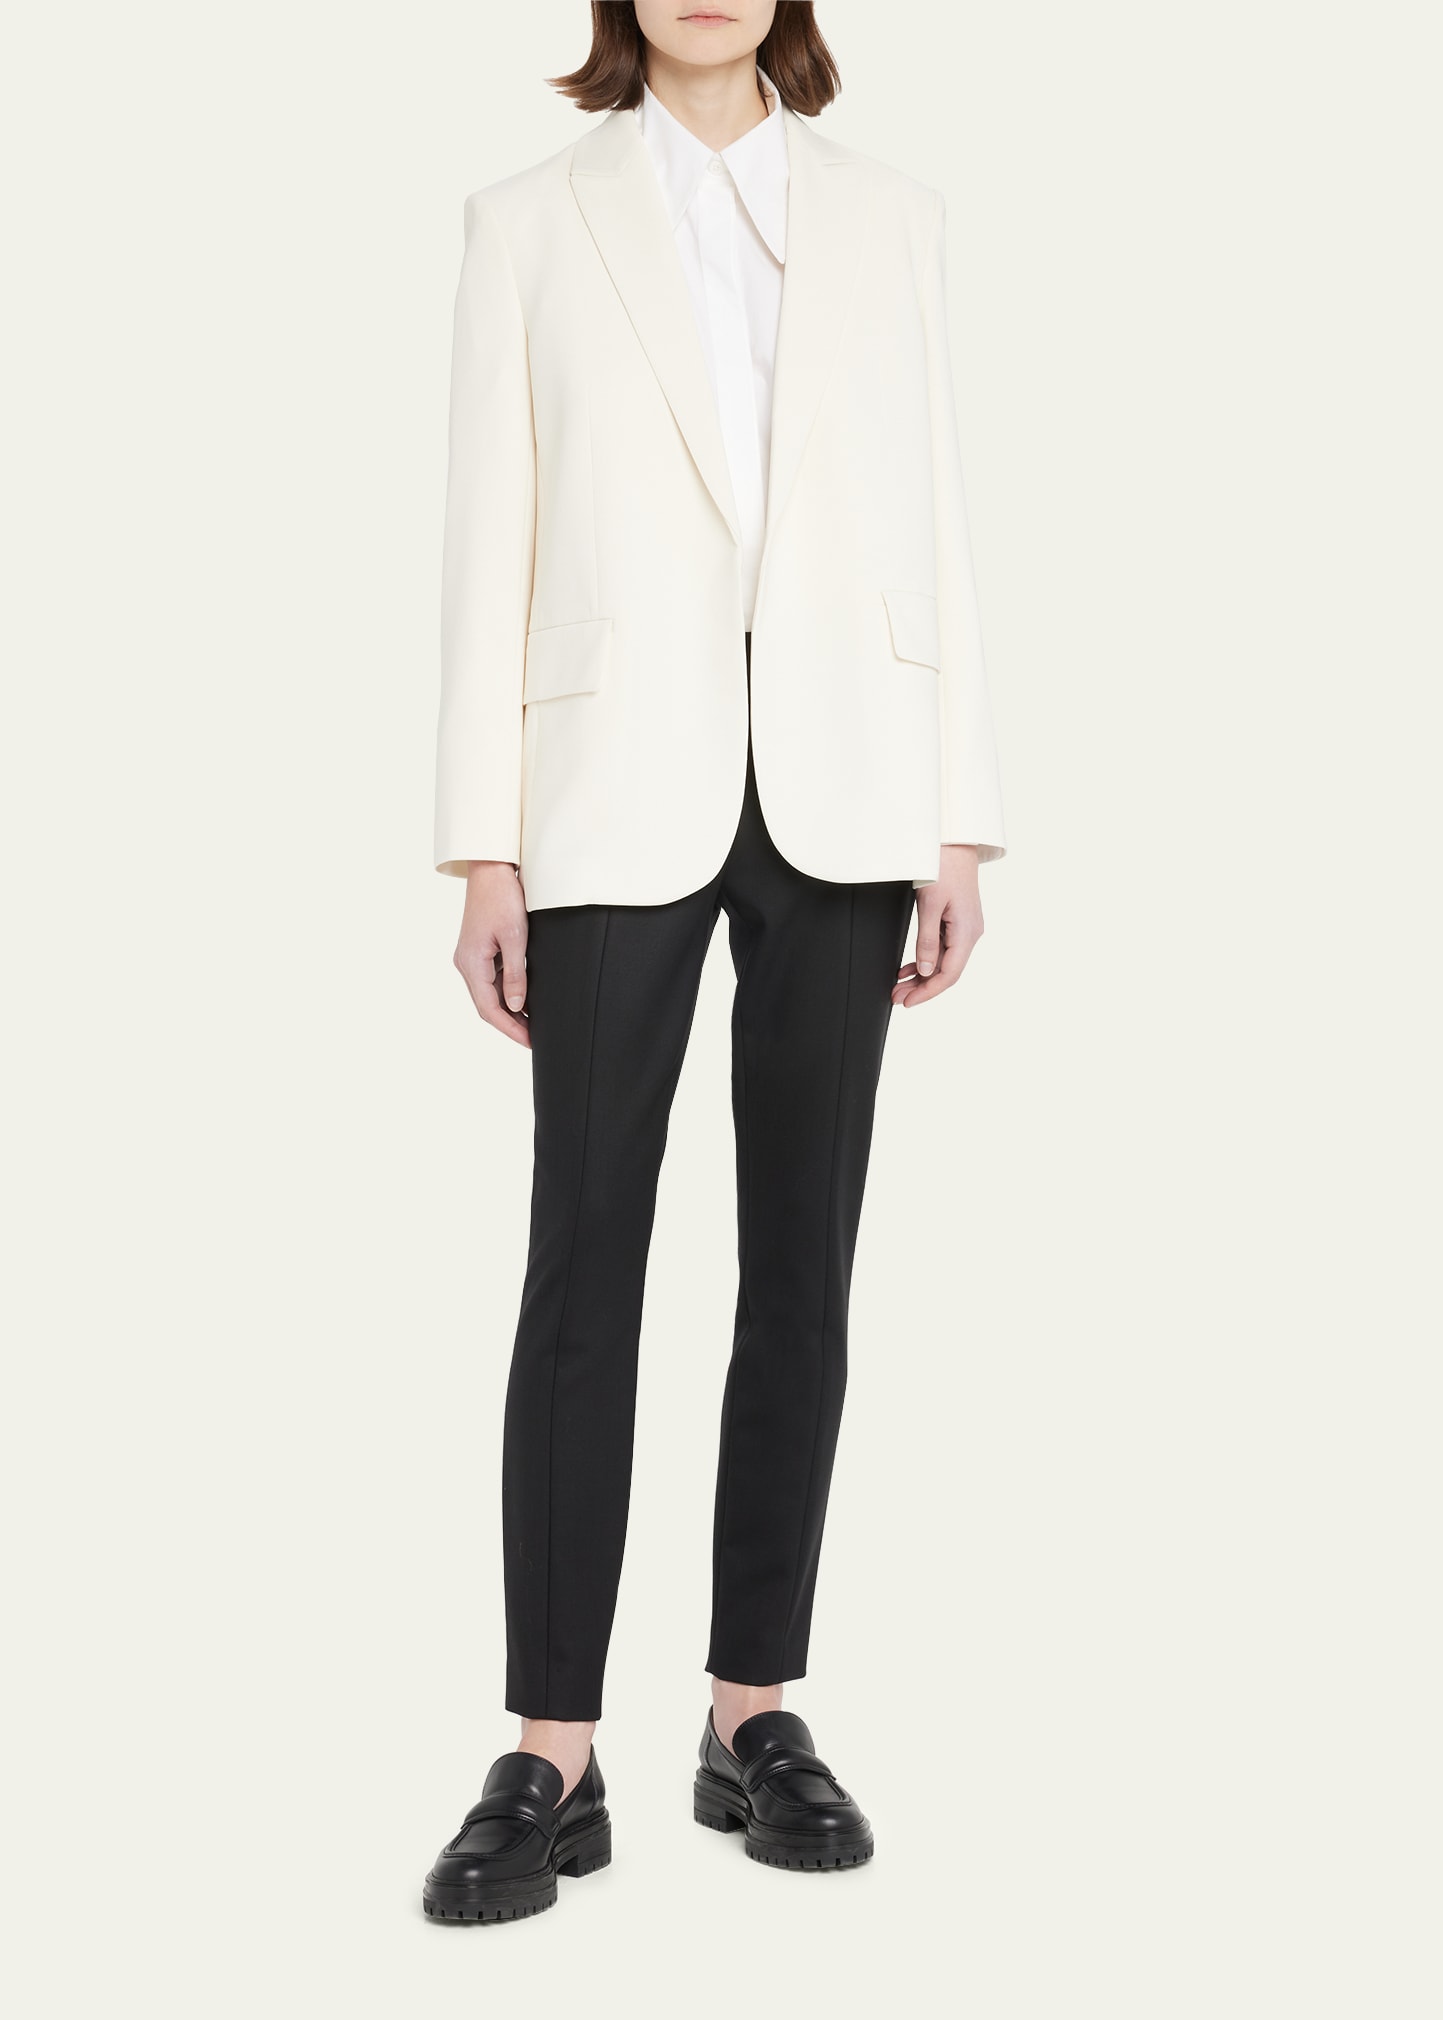 Admiral Crepe Open-Front Jacket